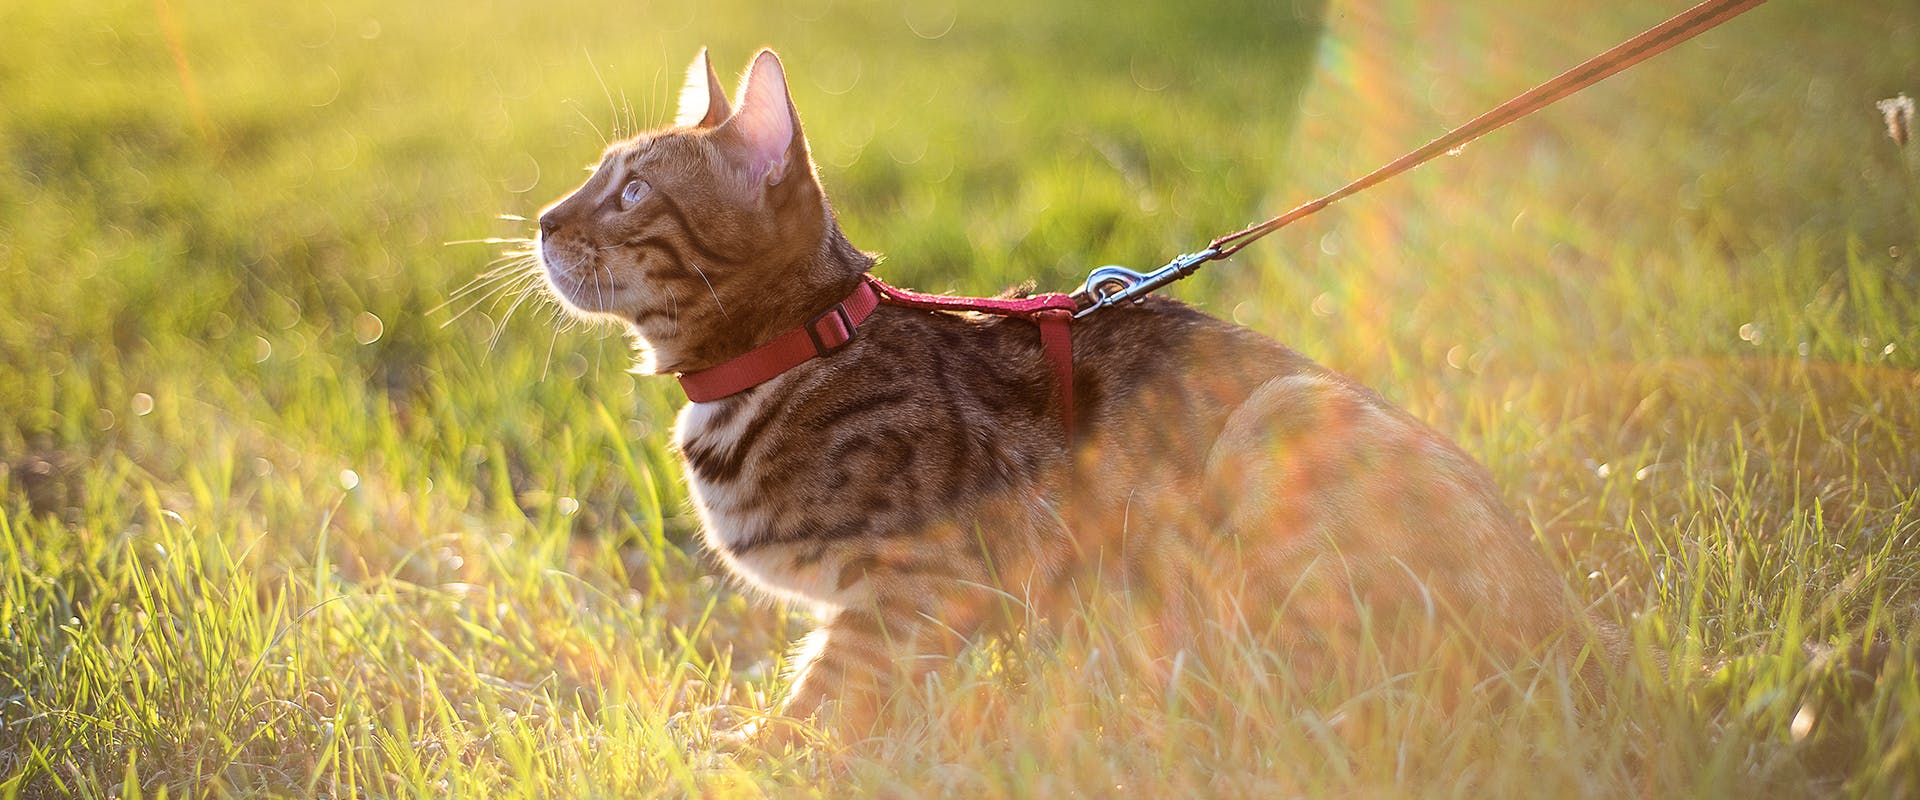 A cat standing in some grass looking up towards the sky, wearing a red cat harness and leash